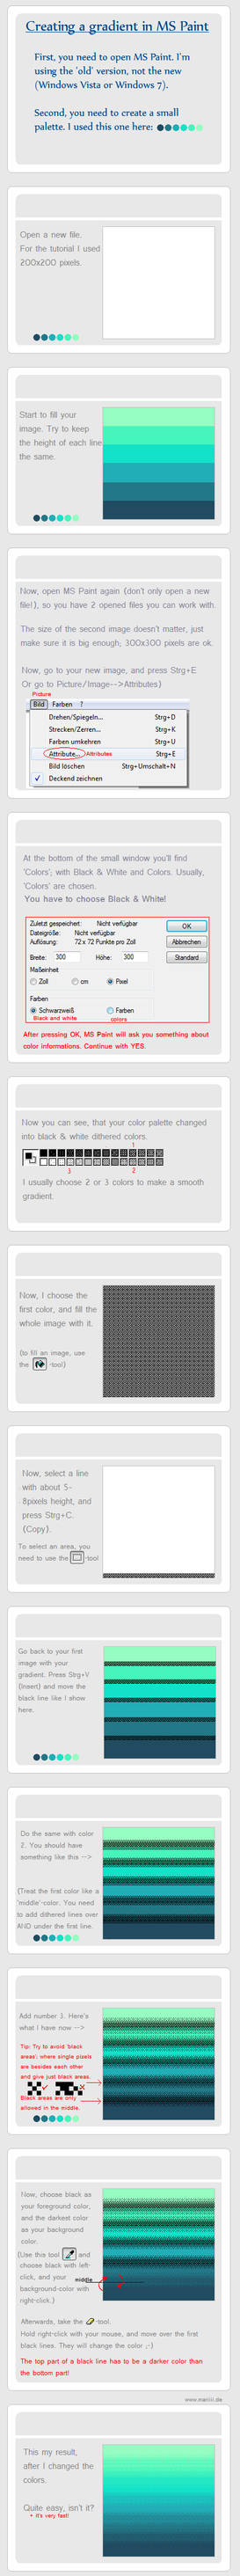 Creating a dithered gradient